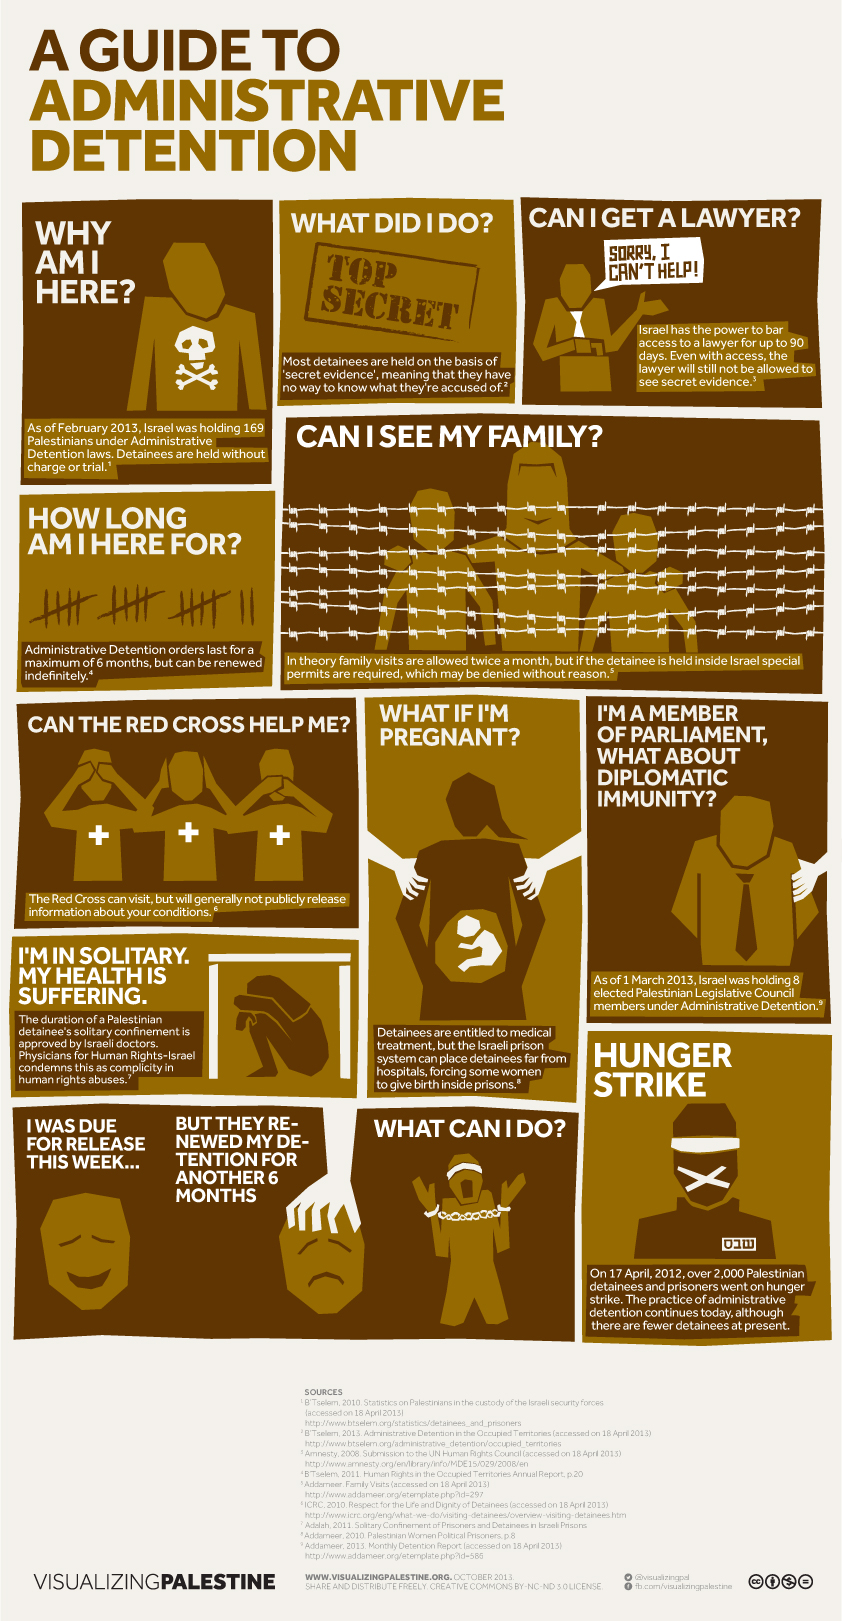 A Guide to Administrative Detention